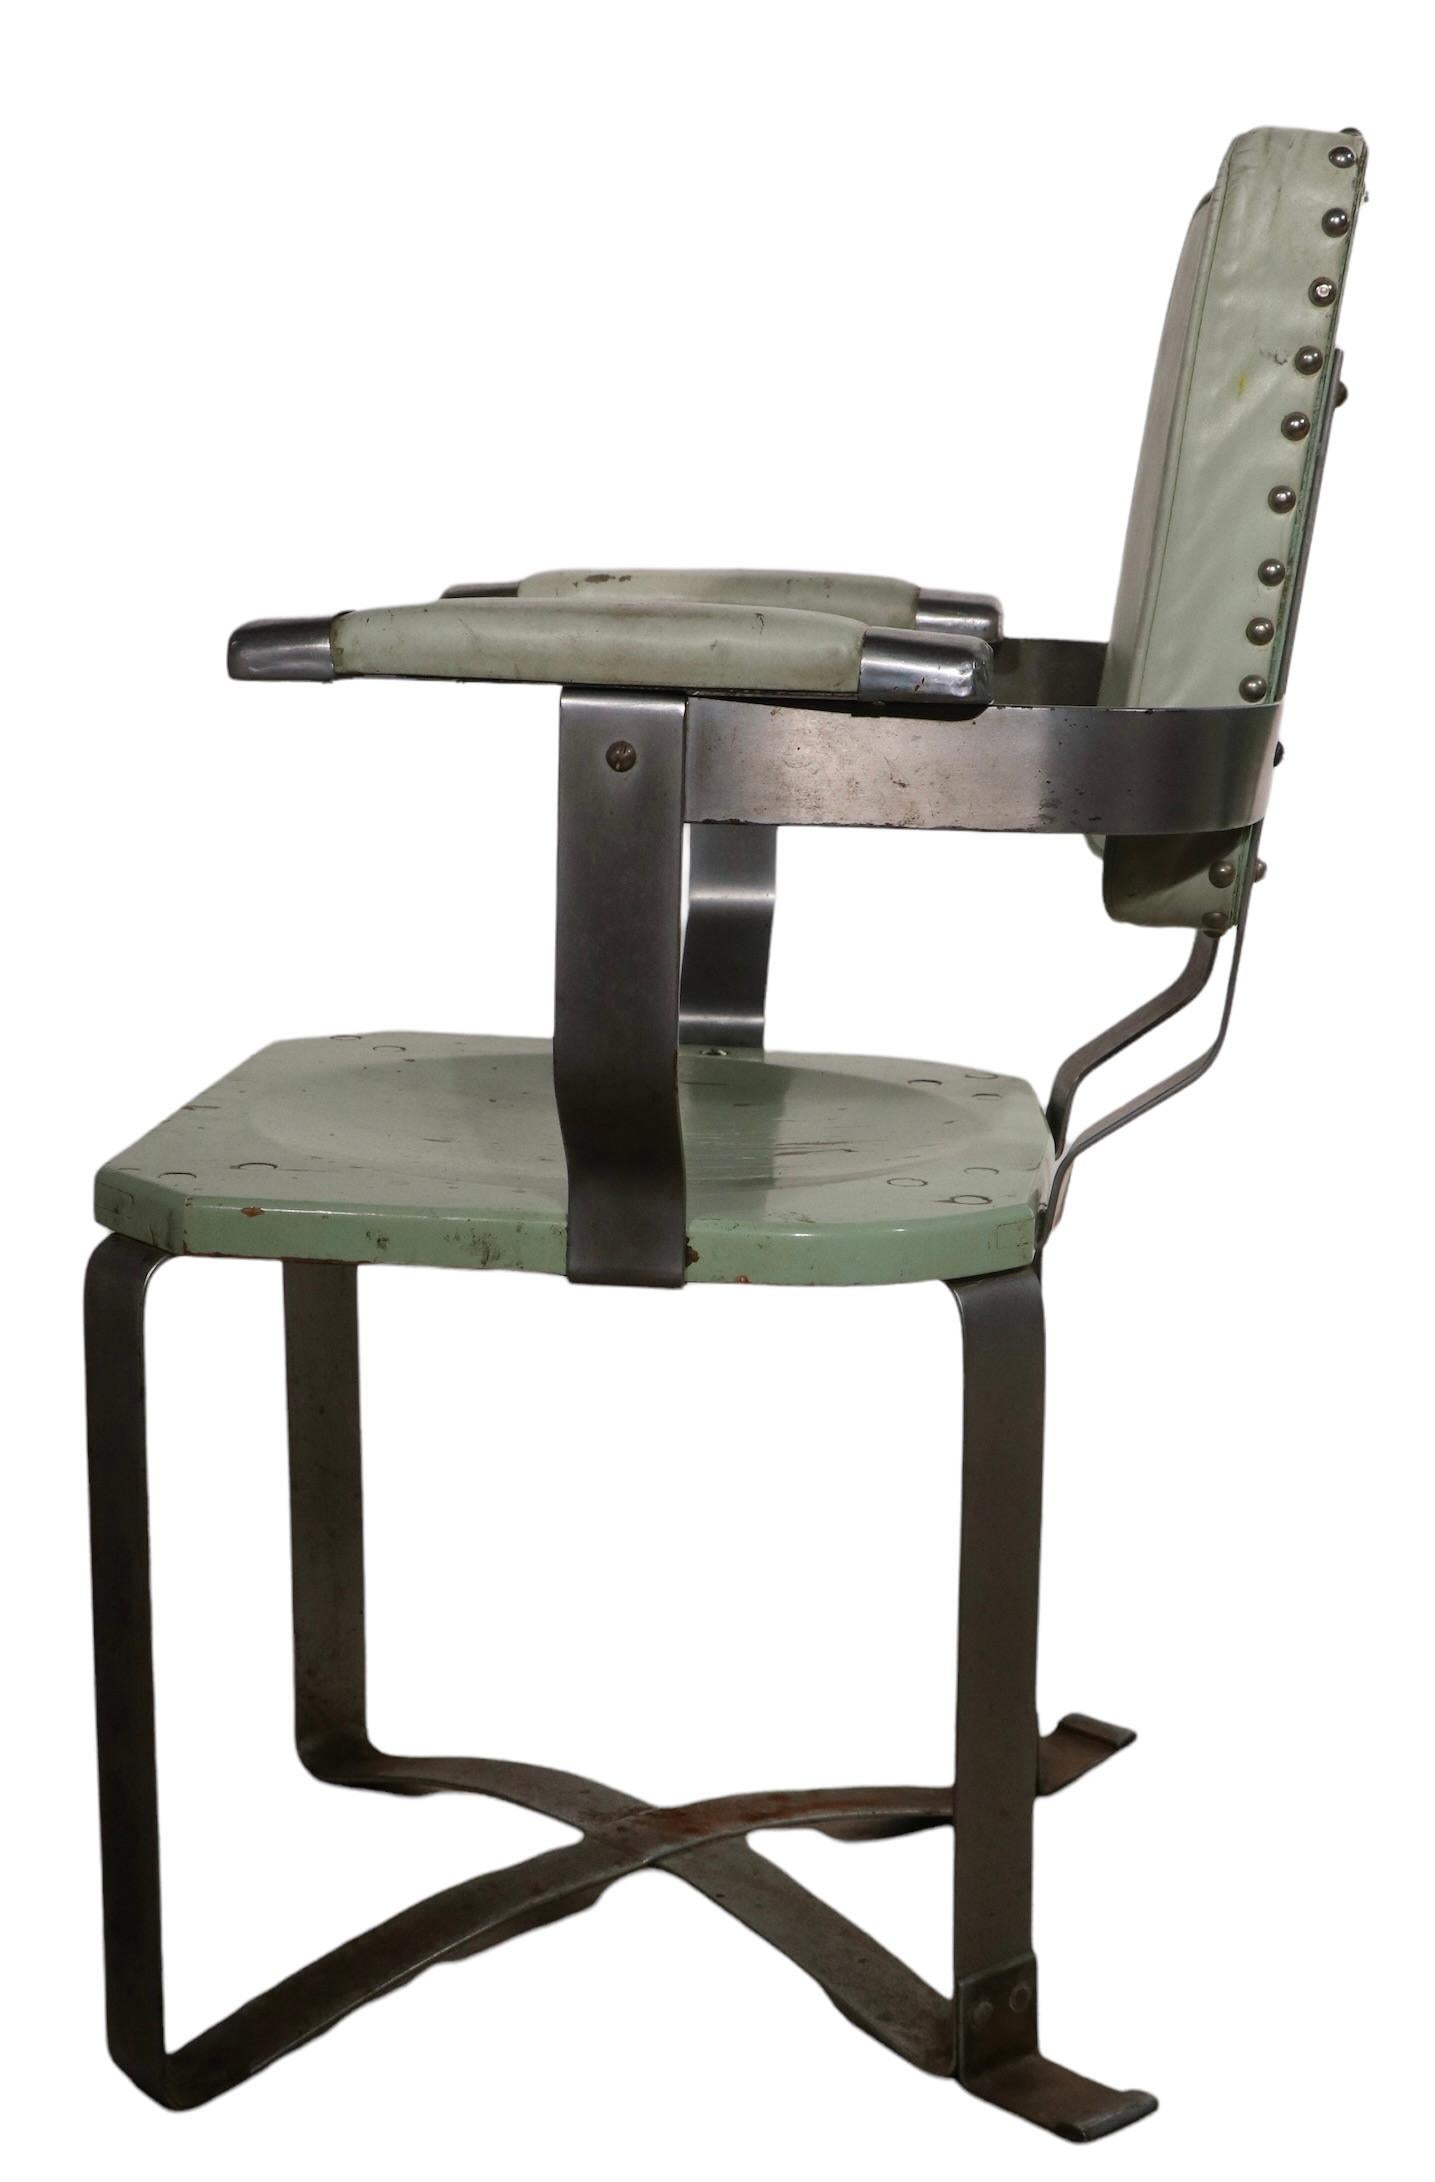 Unusual pair of period Machine Age arm chairs, having chrome plated steel frames, wood seating backrests, and leather upholstered armrests. We believe these could be early prototypes, as we have not seen this form before, nor can we find any